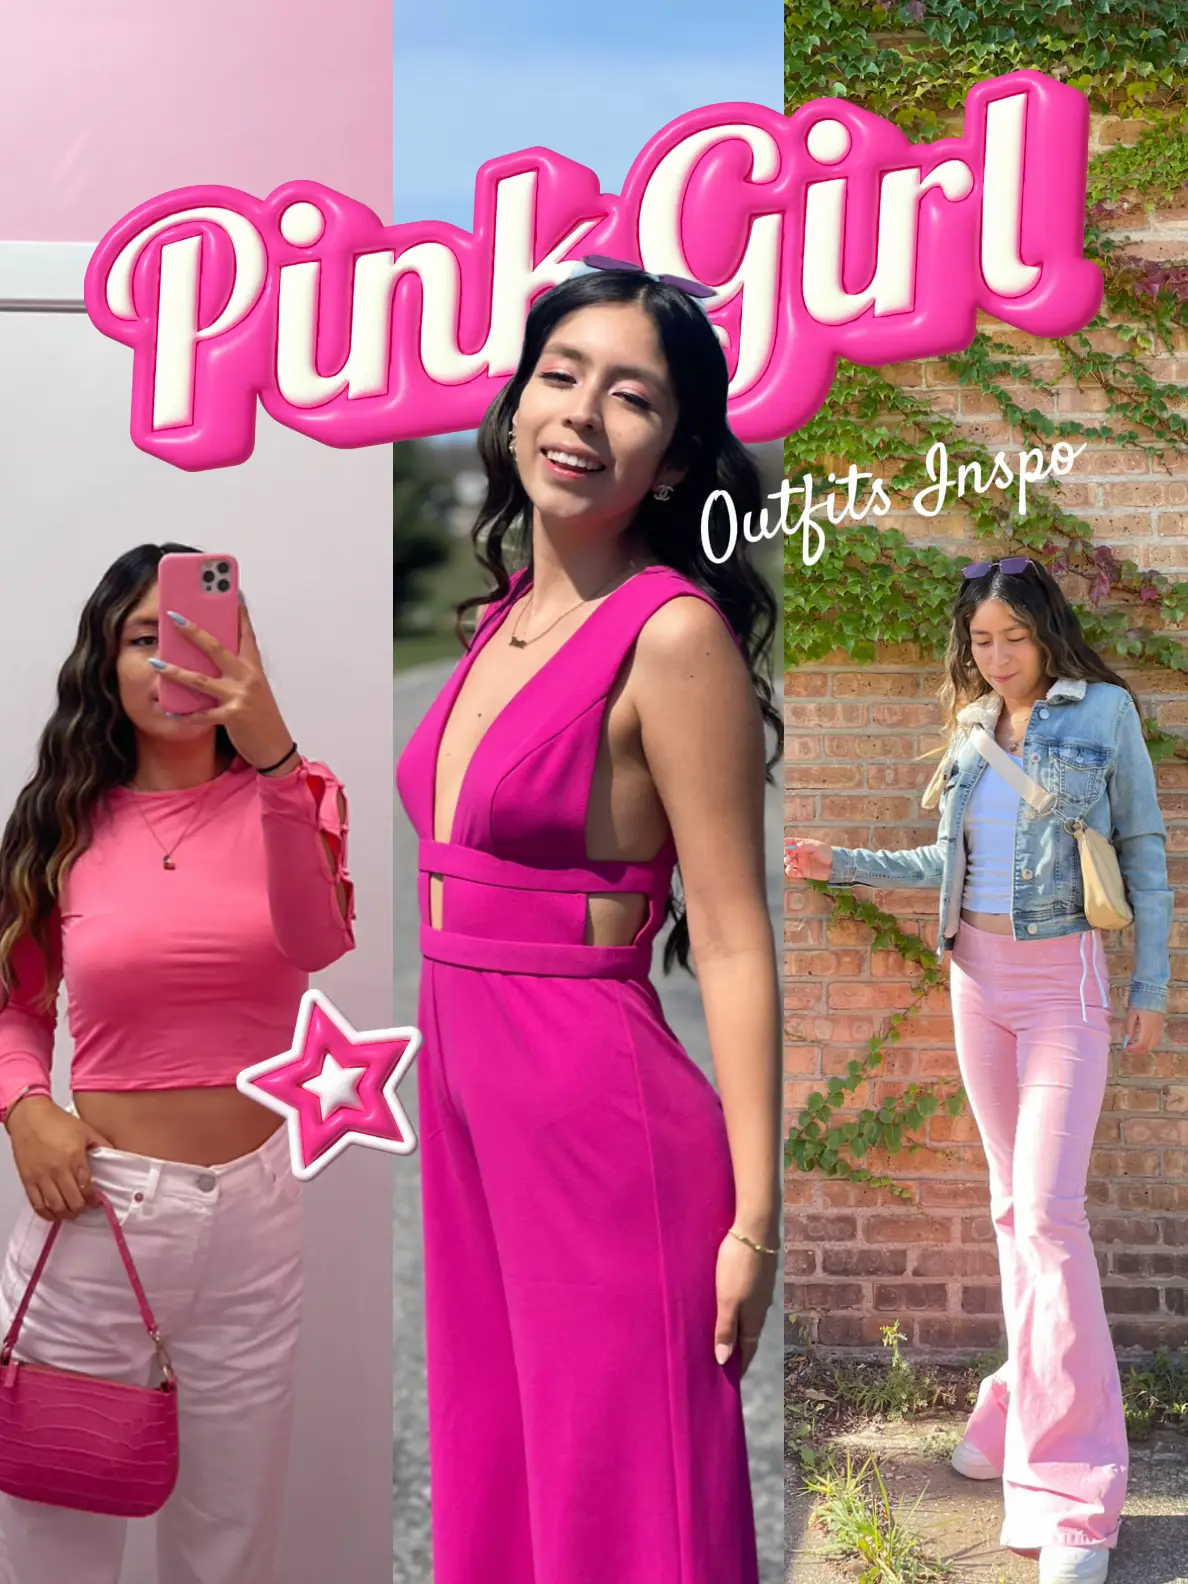 Are you a fan of pink pants 💗?  Gallery posted by Paola Ochoa